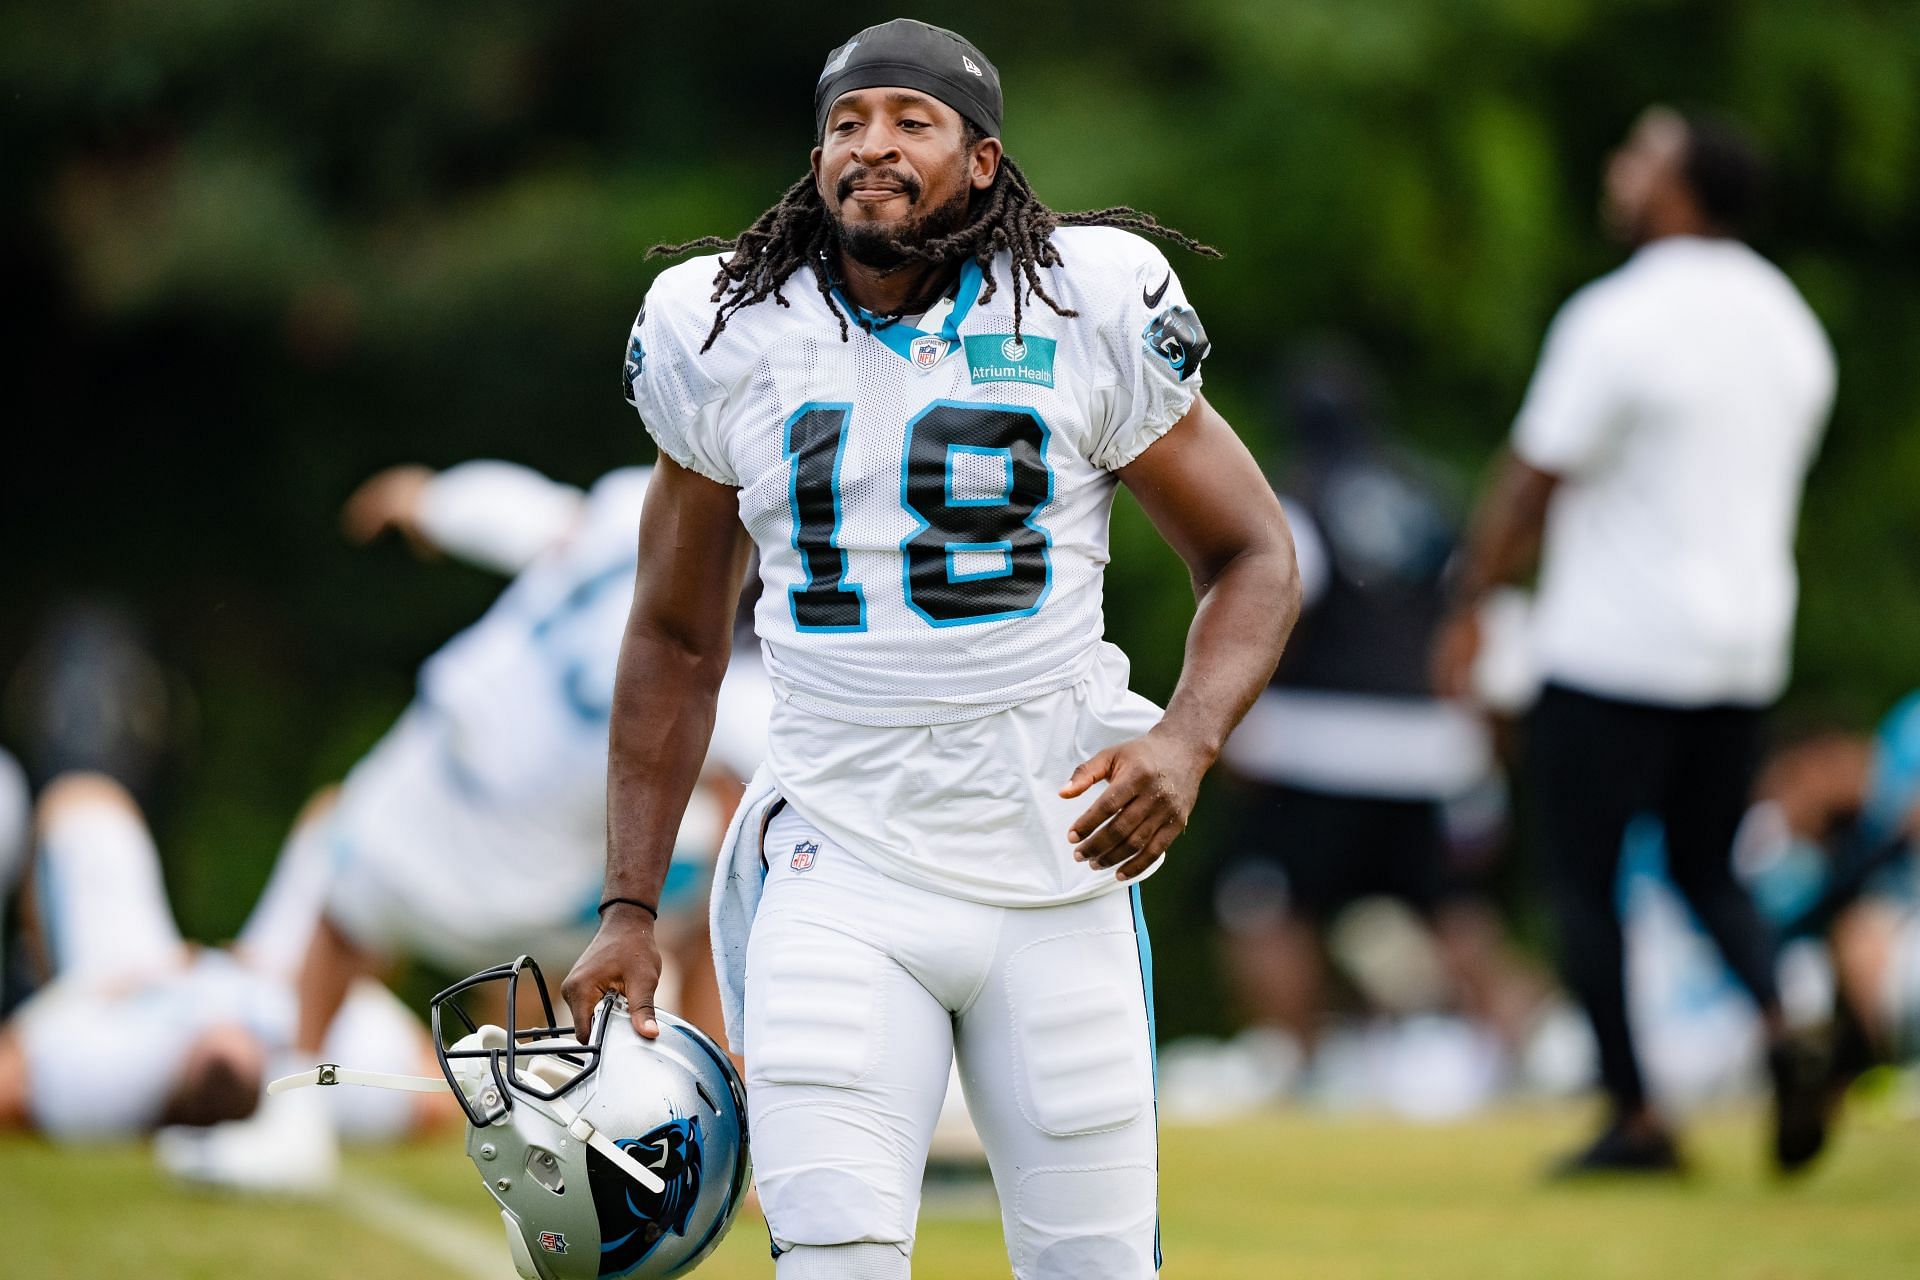 Wide receiver Andre Roberts, #18 of the Carolina Panthers, looks on during training camp on August 06, 2022, in Spartanburg, South Carolina.